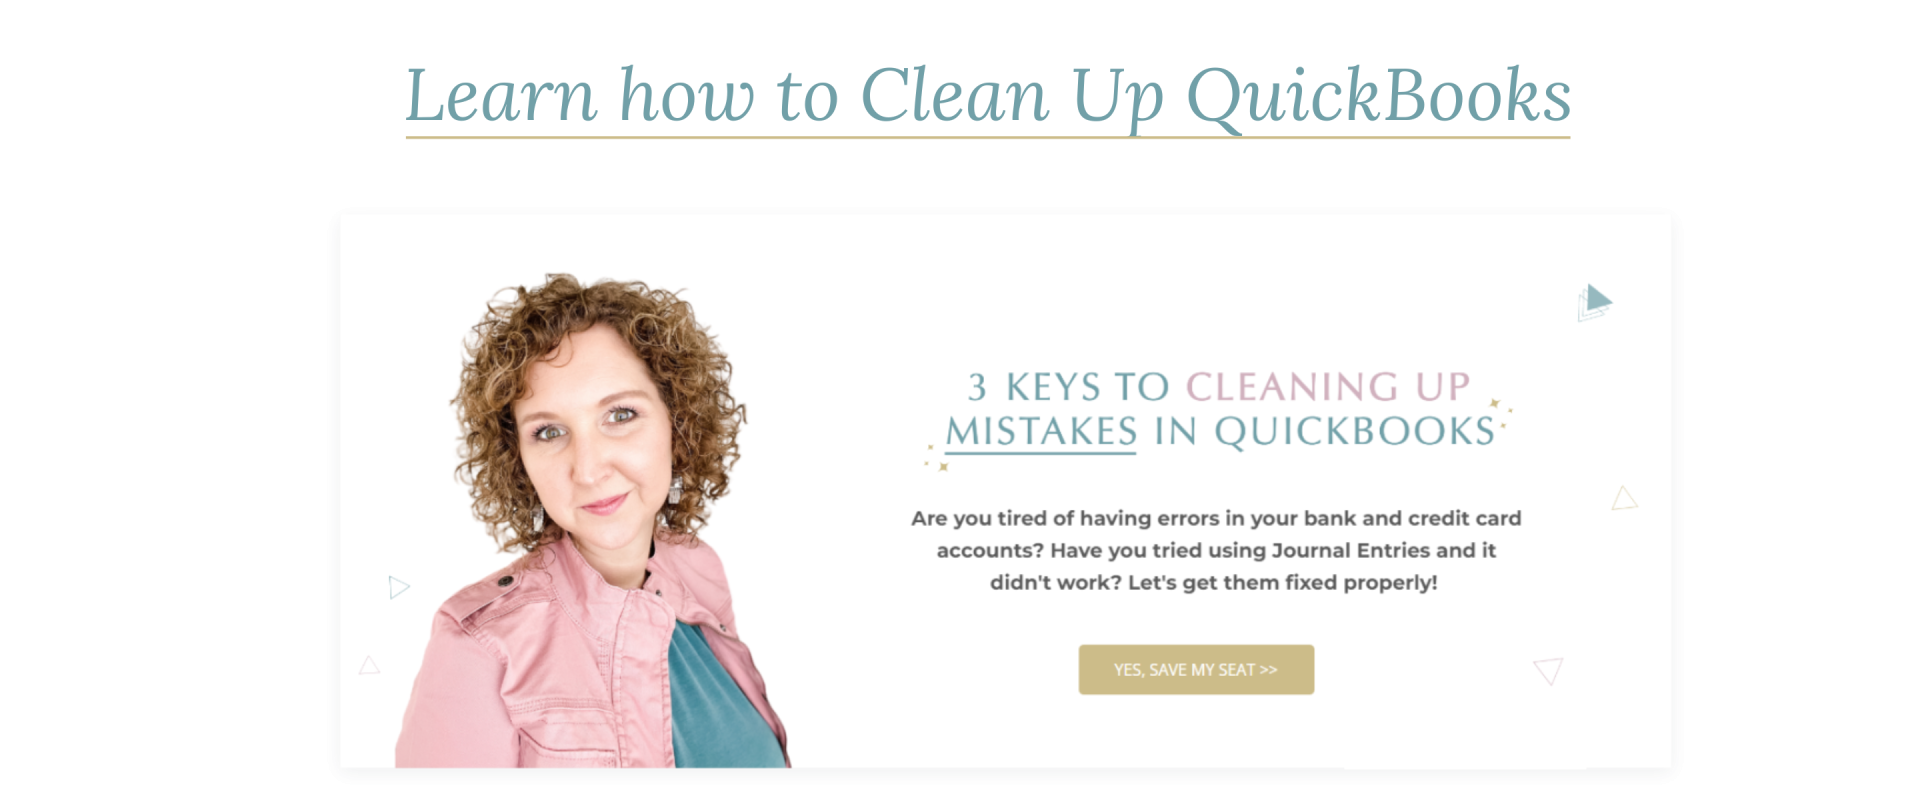 3 Keys to Cleaning Up Mistakes QuickBooks Candus Kampfer